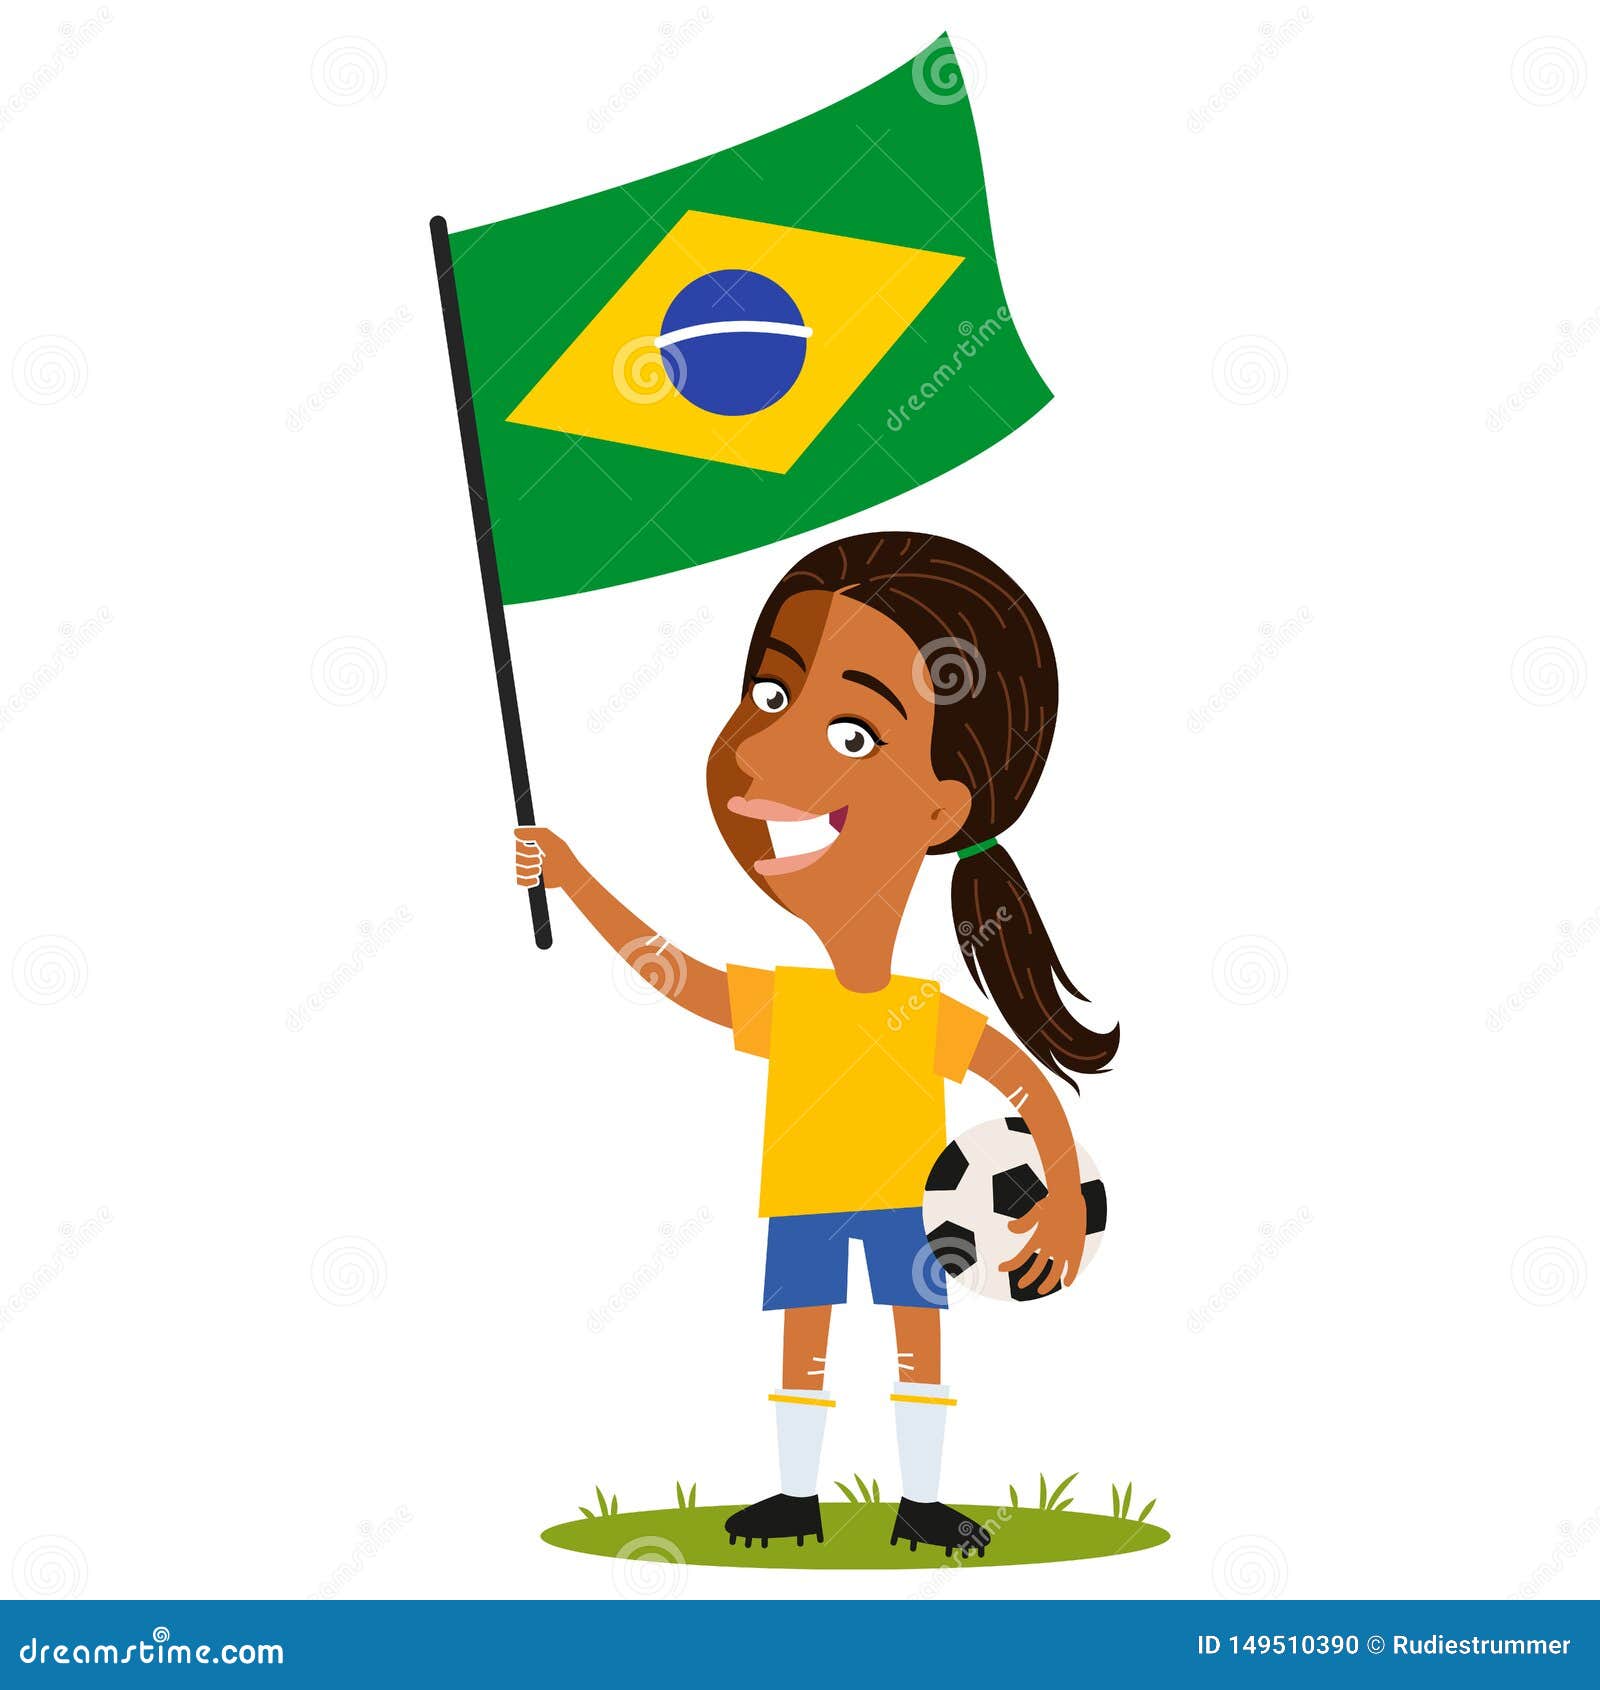 Women`s Football, Female Player for Brazil, Cartoon Woman Holding Brazilian  Flag Wearing Yellow Shirt and Blue Shorts Stock Vector - Illustration of  friendly, character: 149510390